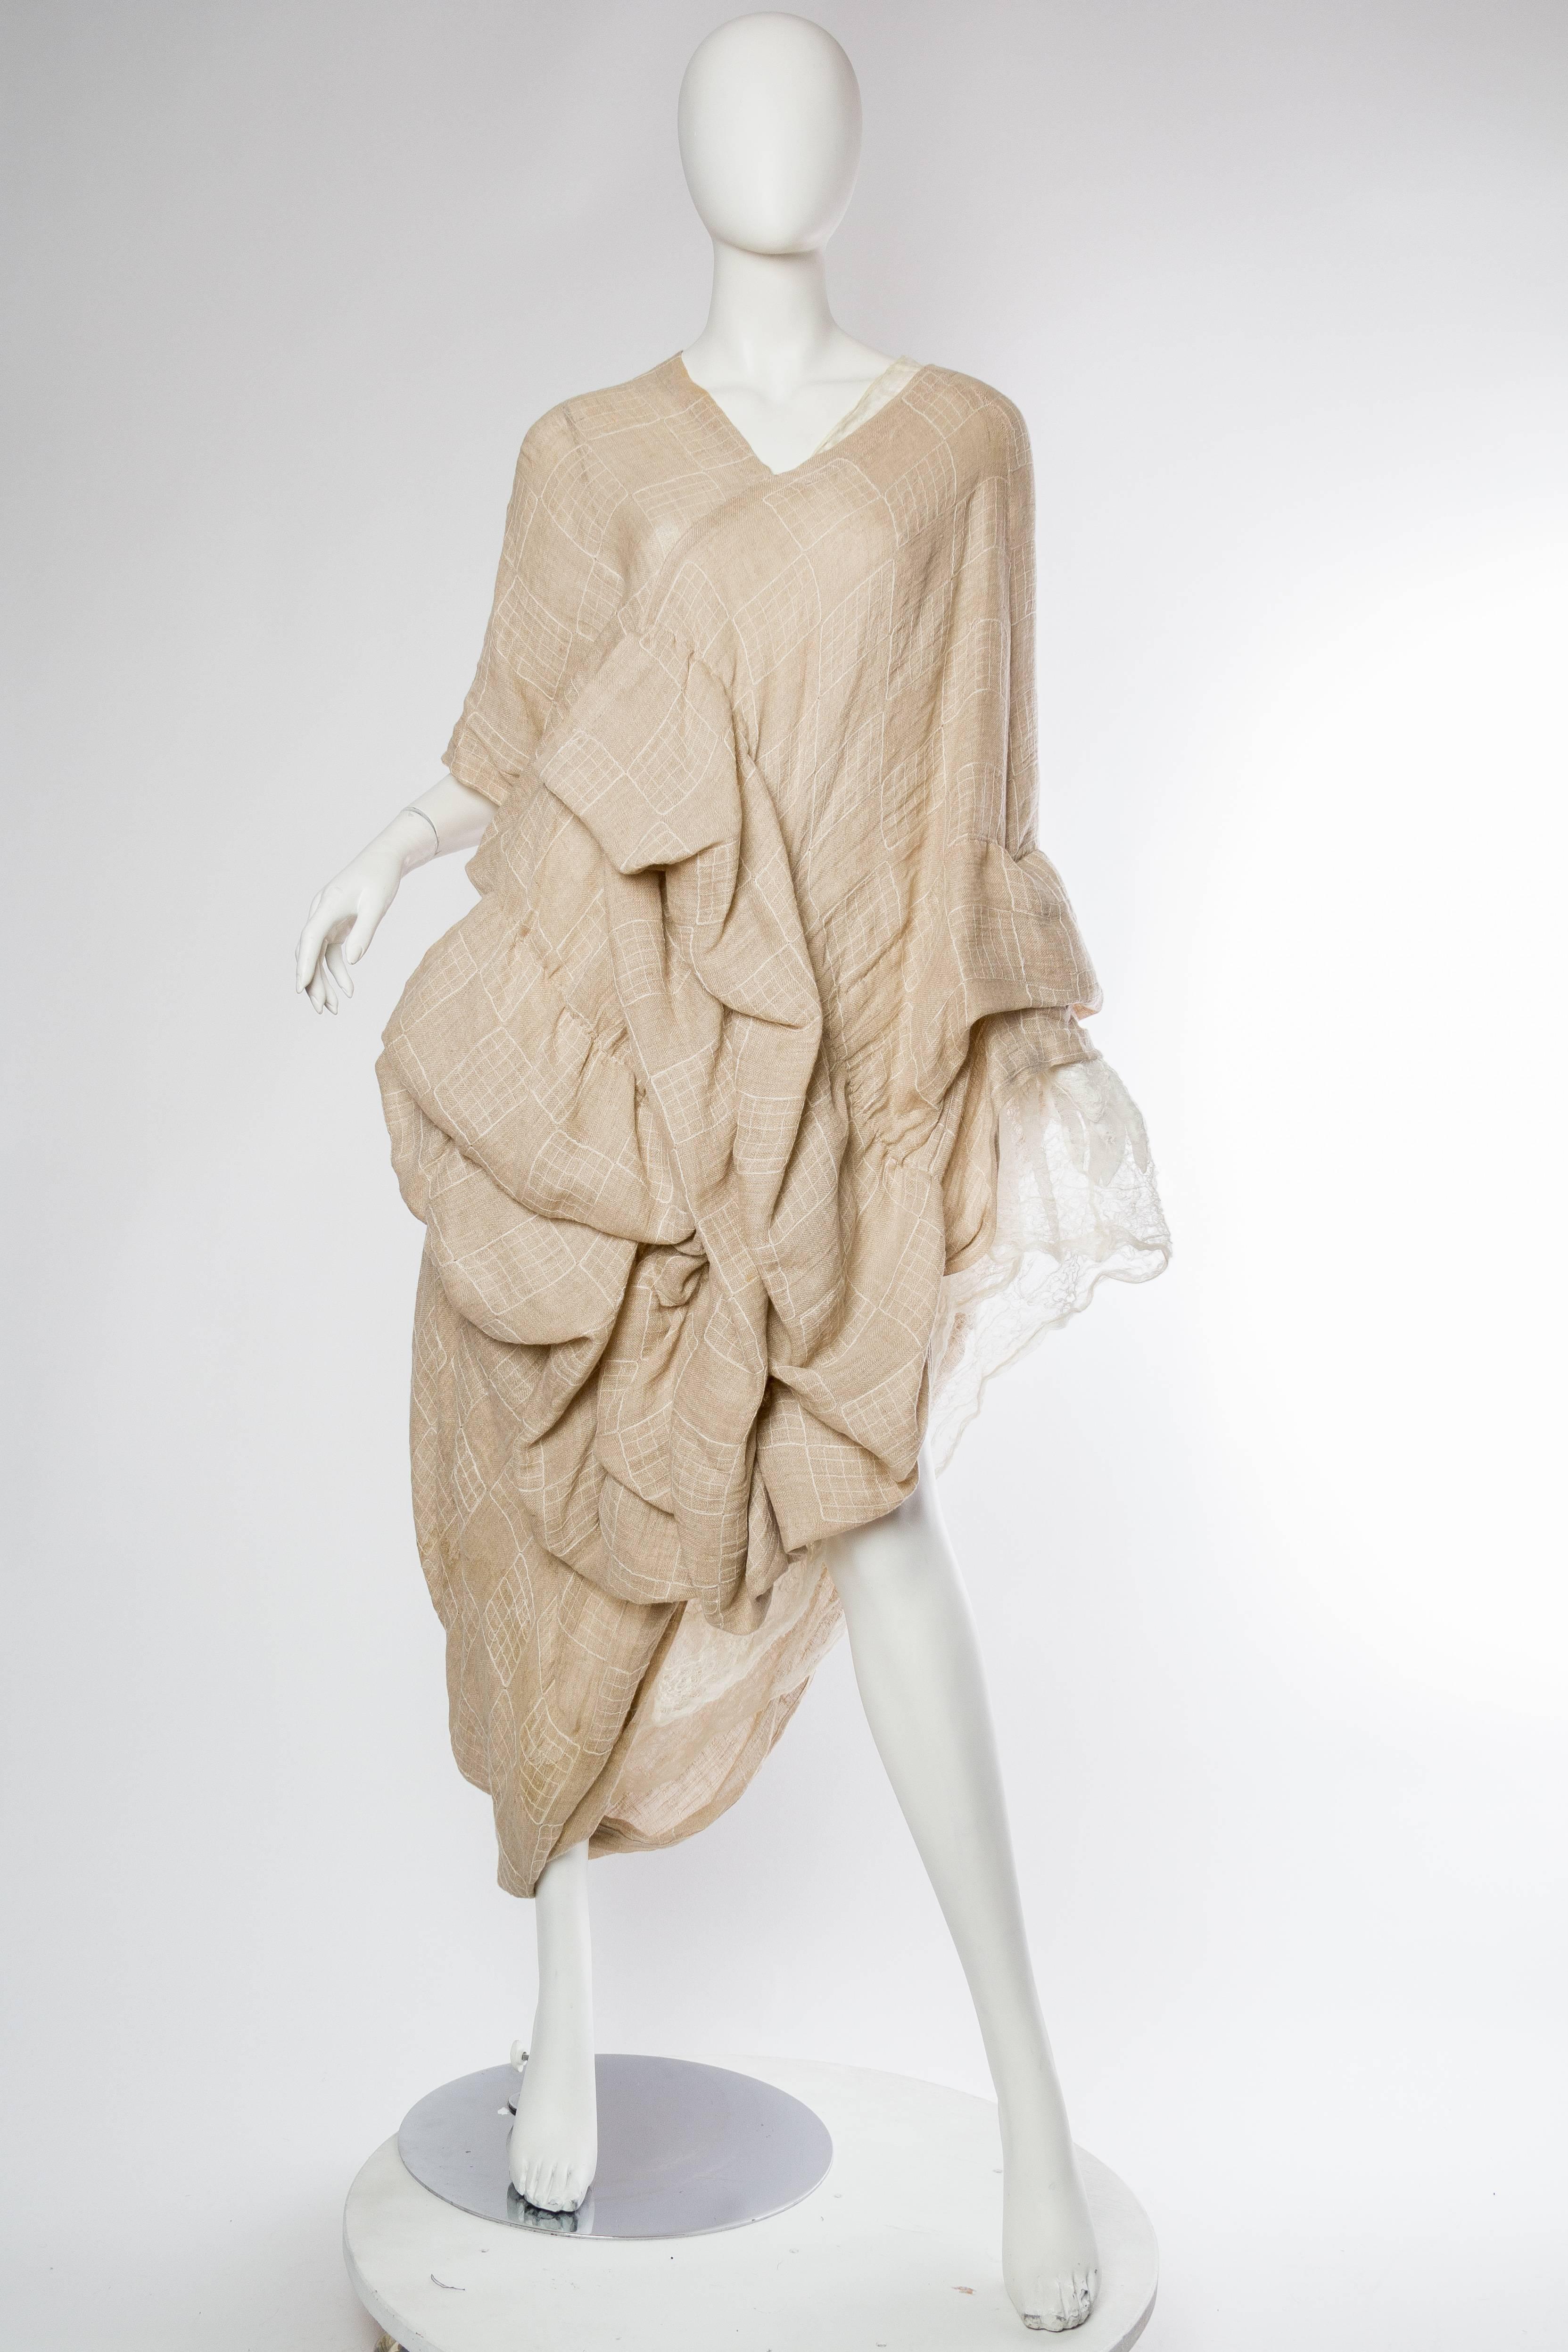 Originally purchased in the early 1980s in New York and worn once as a wedding dress by a seriously cool avant garde bride. This is a painfully rare and early piece from Comme des Garcons. The piece is in phenomenal condition and it is in a very